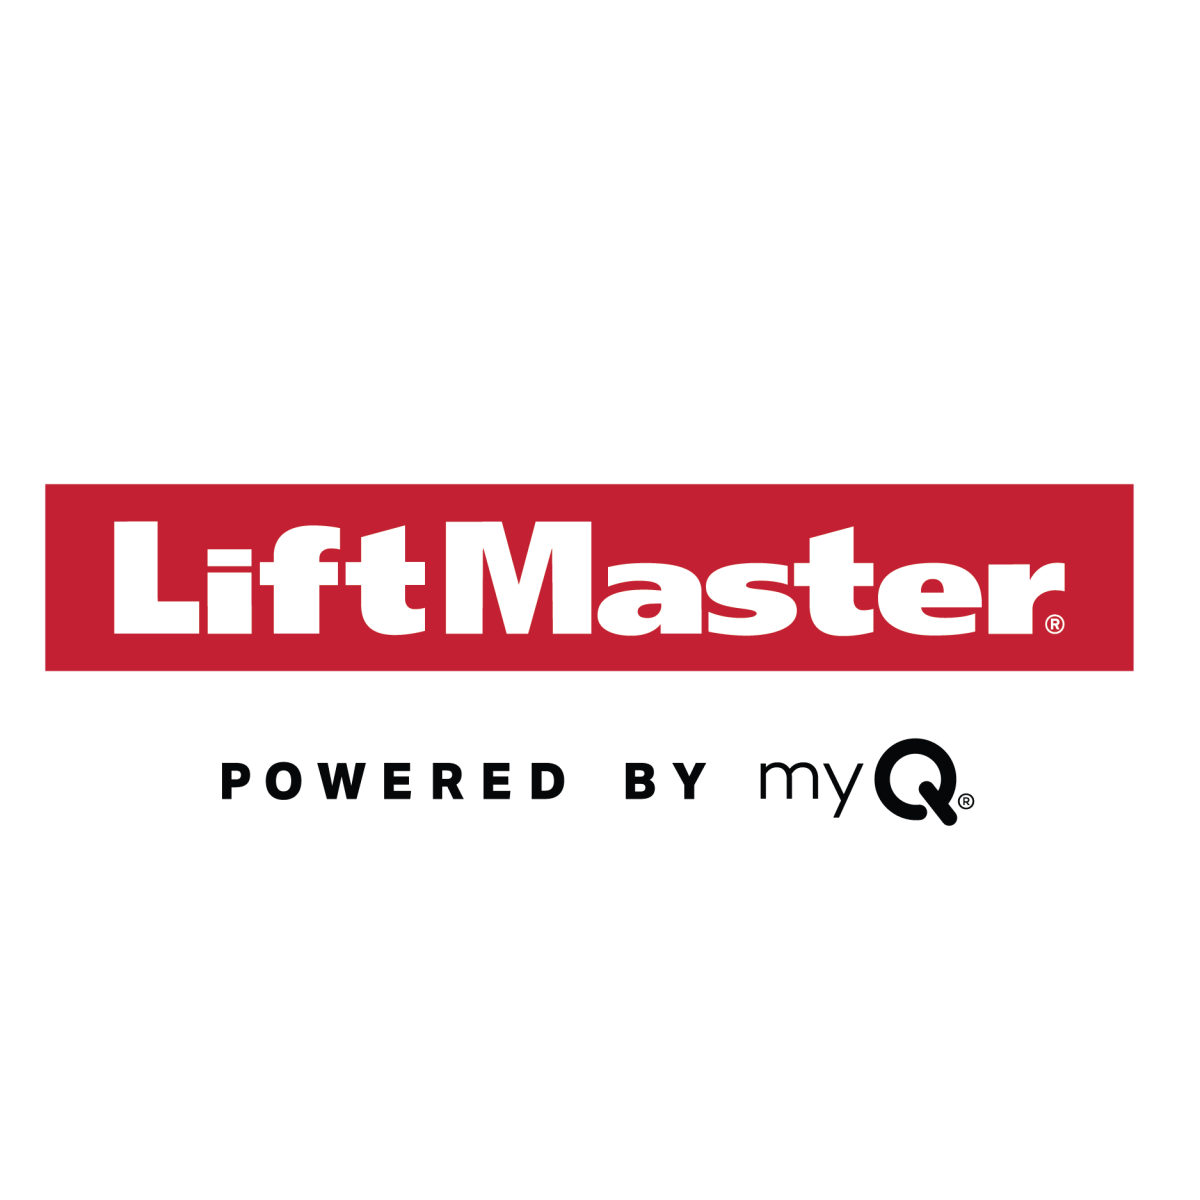 LiftMaster powered by myQ